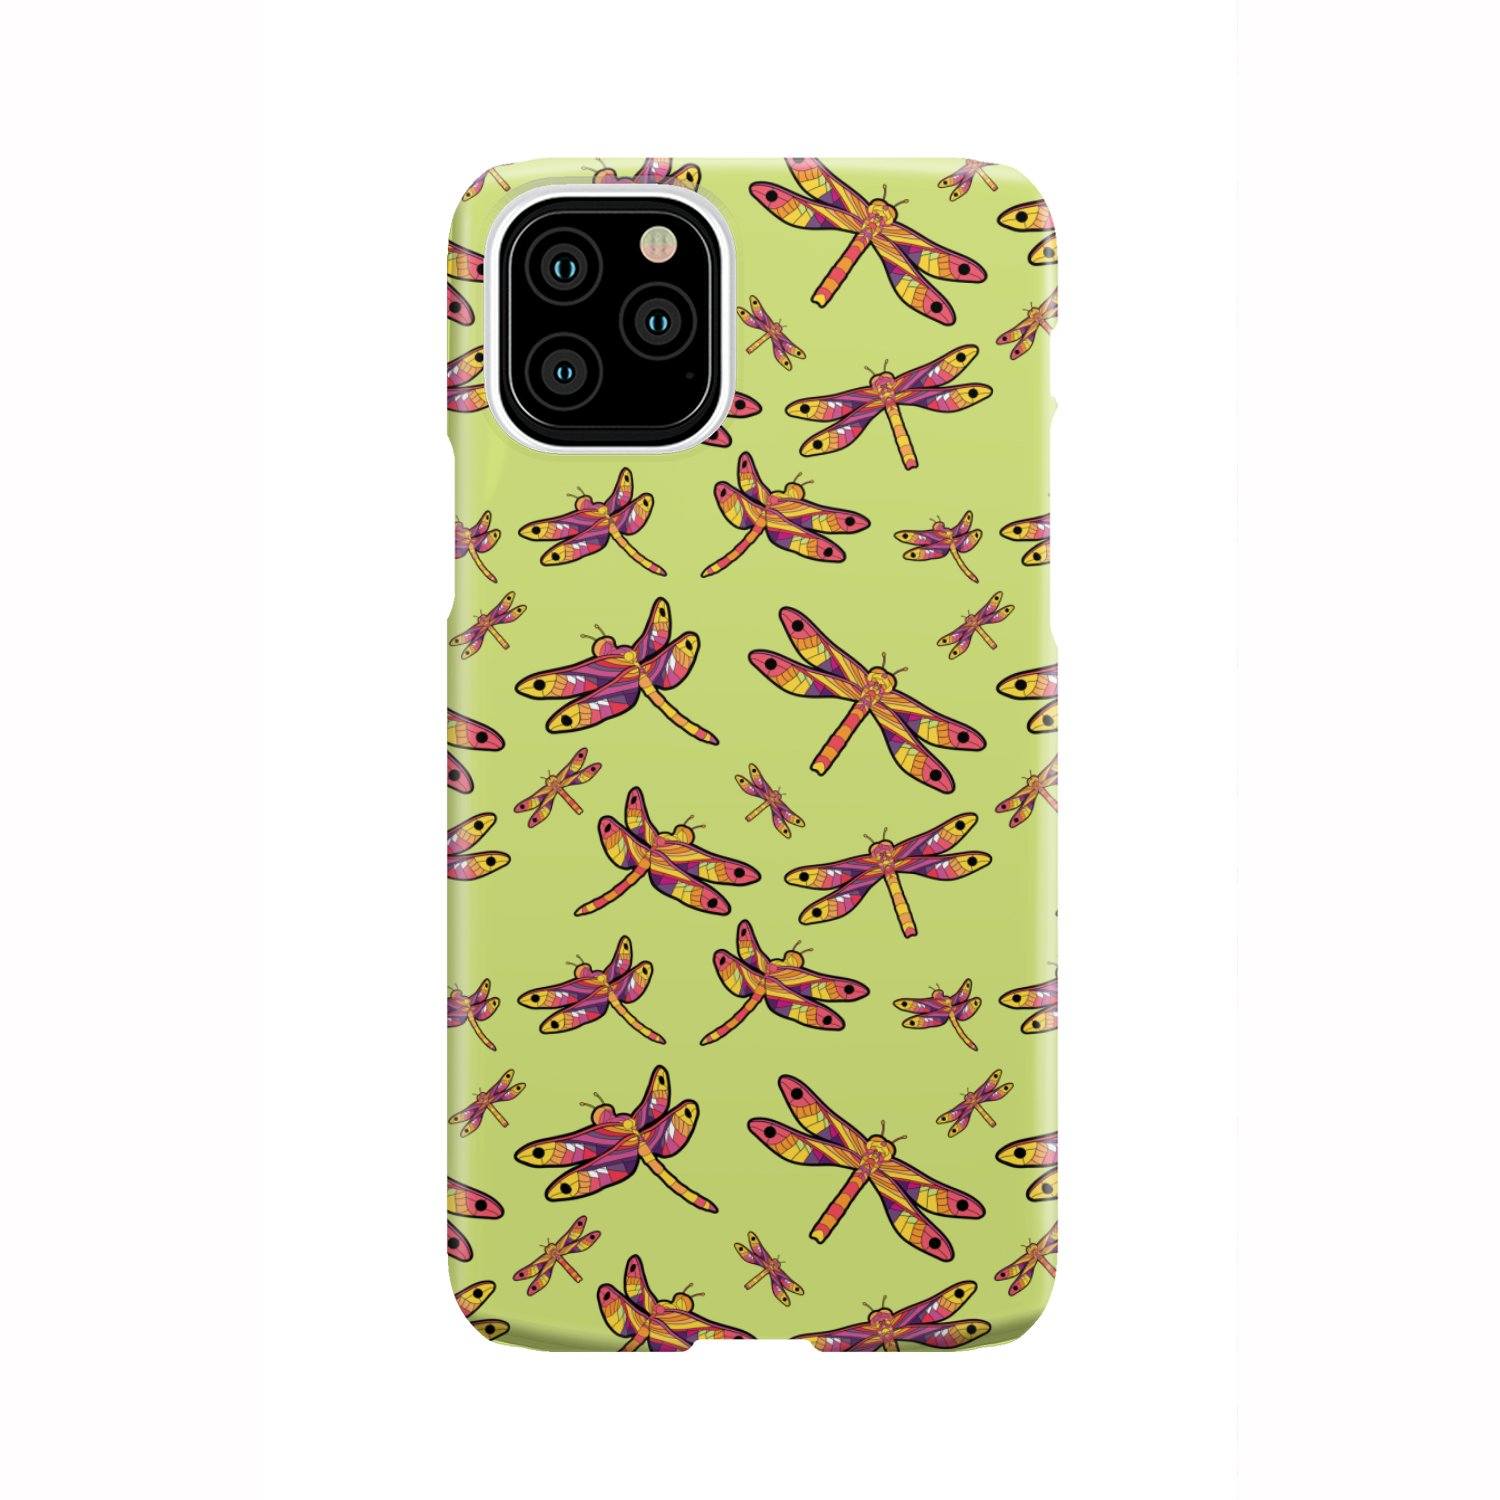 Gathering Lime Phone Case Phone Case wc-fulfillment iPhone 11 Pro 